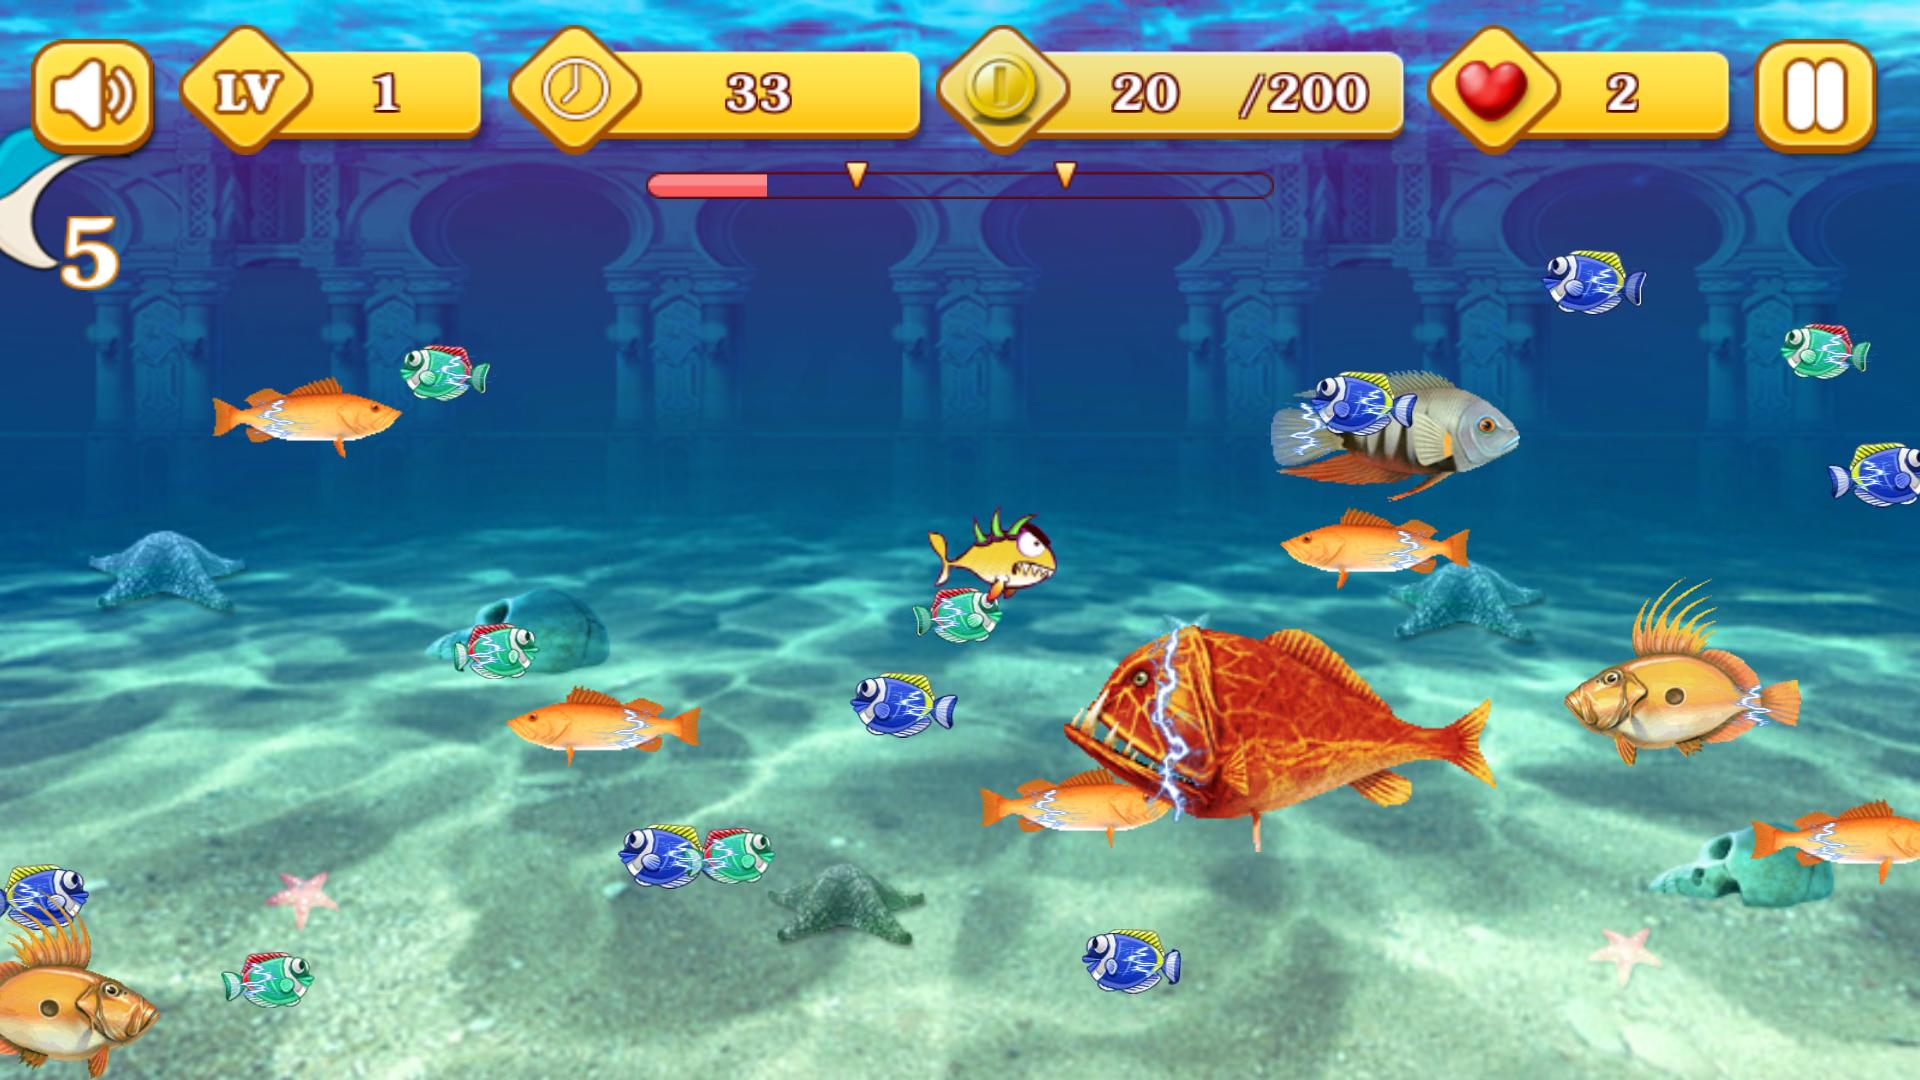 Fish Eat Fish for Android - APK Download